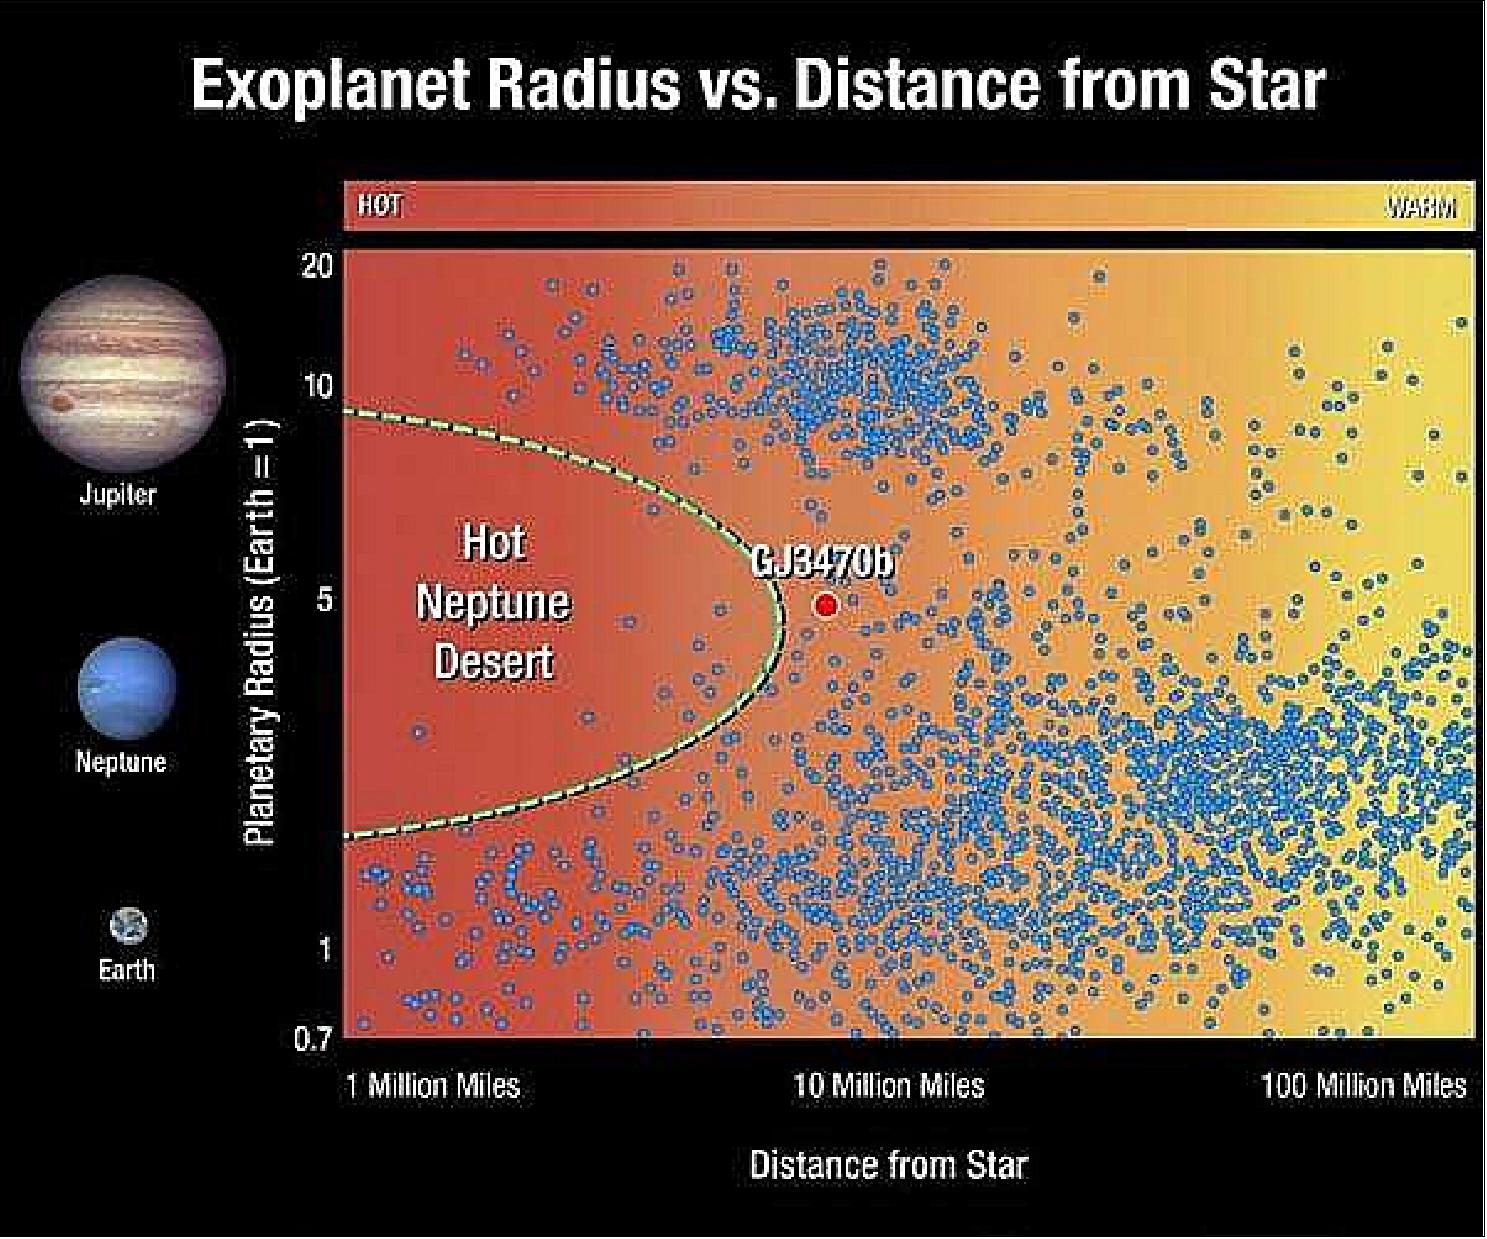 Figure 3: This graphic plots exoplanets based on their size and distance from their star. Each dot represents an exoplanet. Planets the size of Jupiter (located at the top of the graphic) and planets the size of Earth and so-called super-Earths (at the bottom) are found both close and far from their star. But planets the size of Neptune (in the middle of the plot) are scarce close to their star. This so-called desert of hot Neptunes shows that such alien worlds are rare, or, they were plentiful at one time, but have since disappeared. The detection that GJ 3470b, a warm Neptune at the border of the desert, is fast losing its atmosphere suggests that hotter Neptunes may have eroded down to smaller, rocky super-Earths (image credit: International Team, STScI)